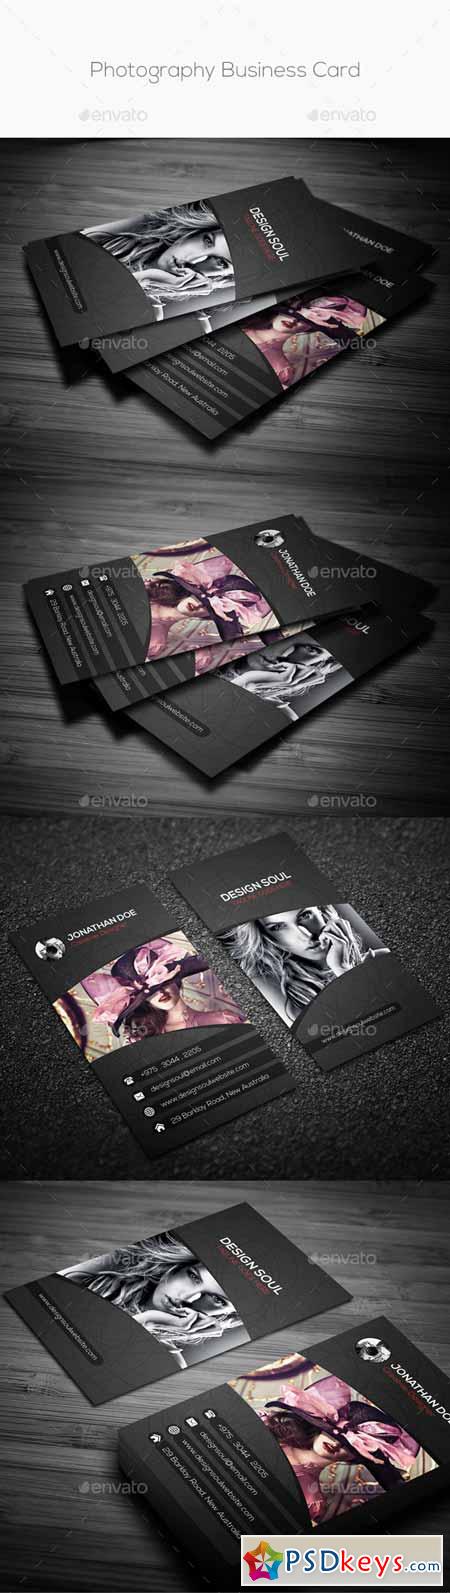 Photography Business Card 10277117